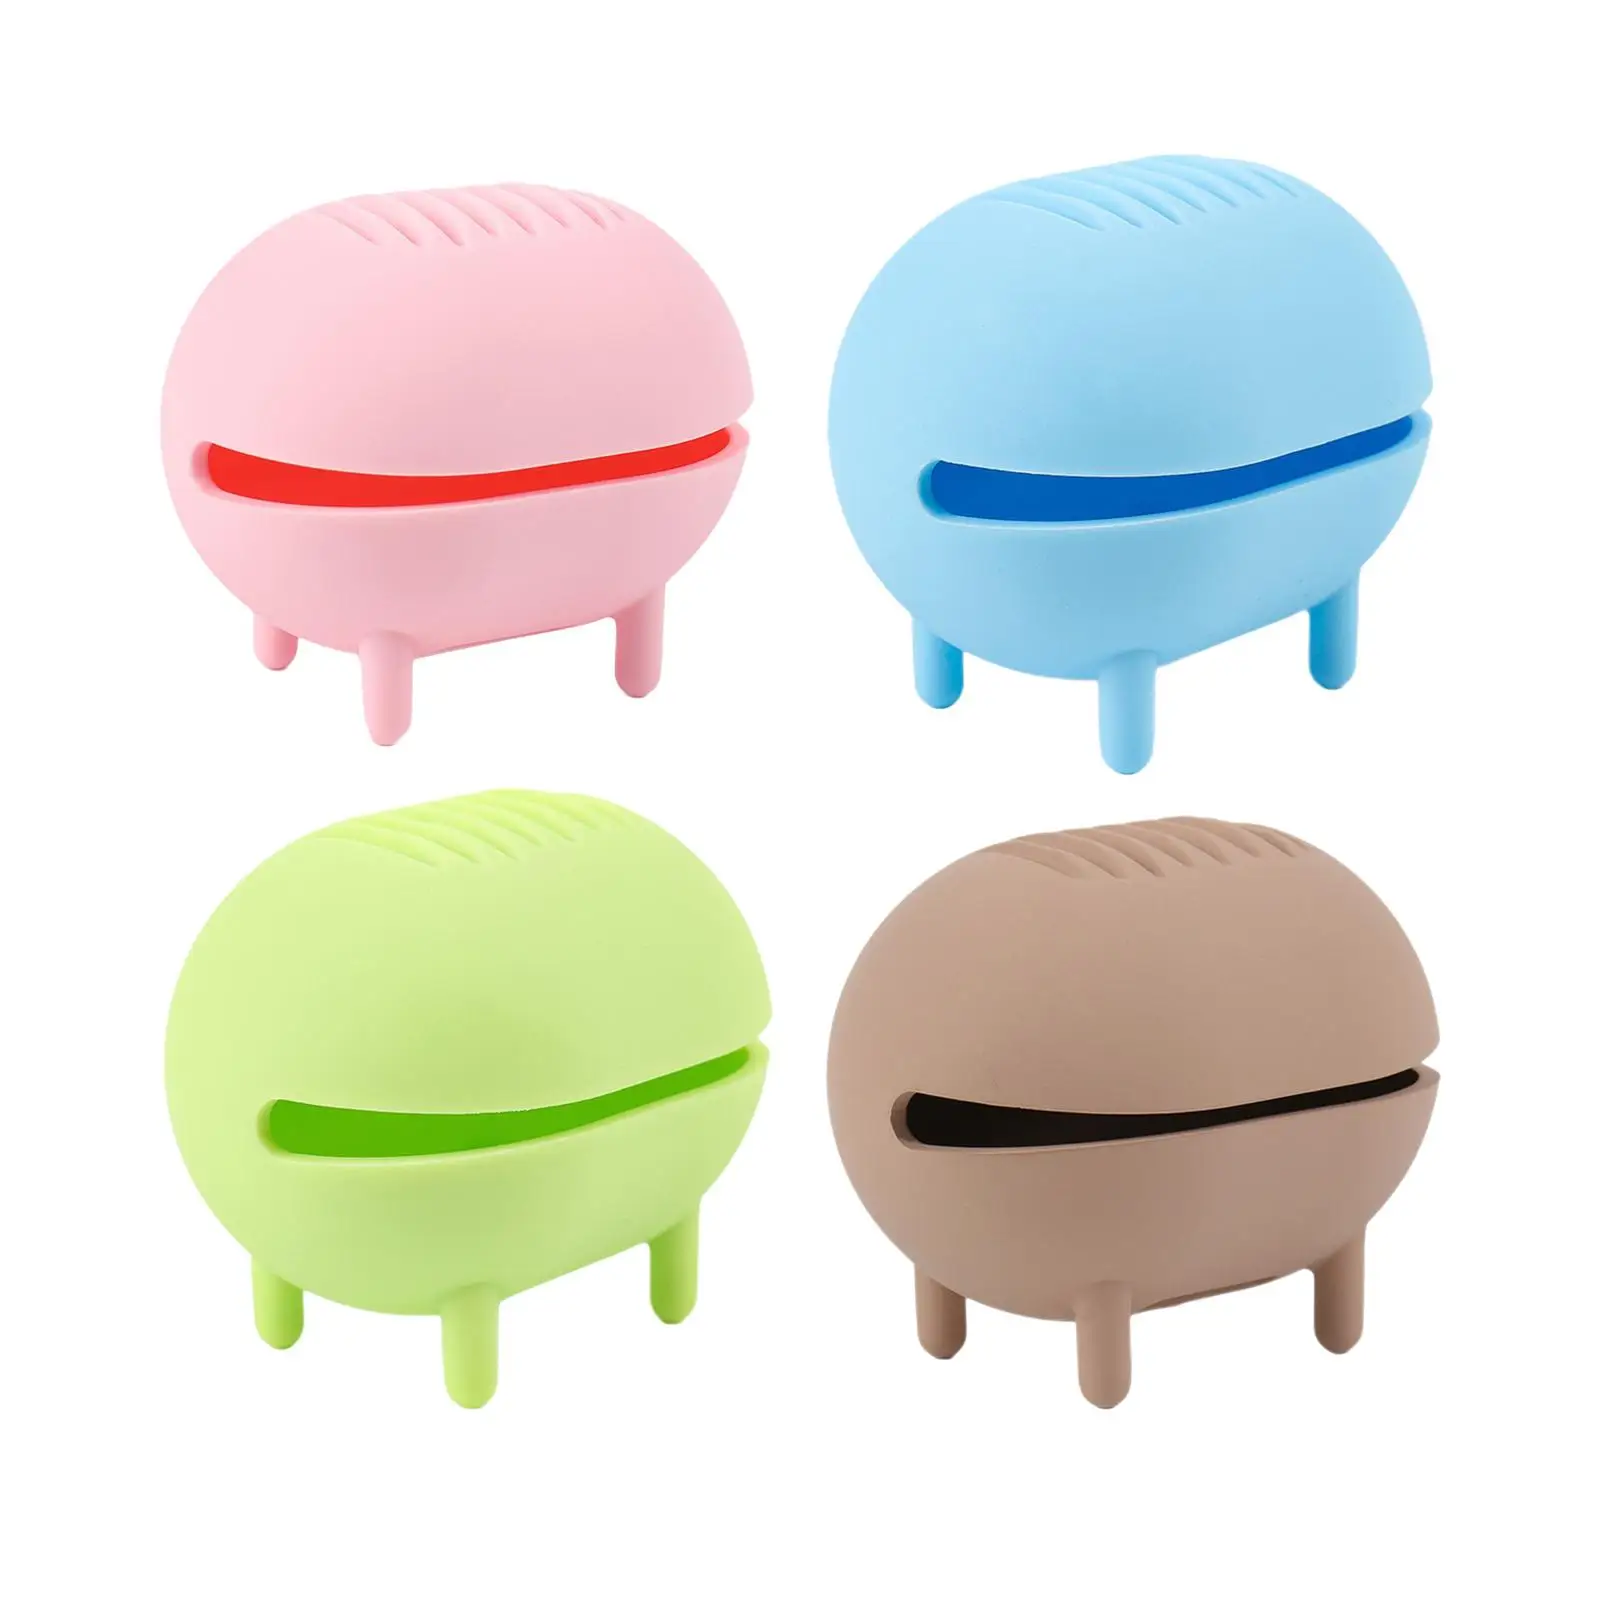 Dustproof Makeup Sponge Holder Puff Drying Silicone Breathable Organizer